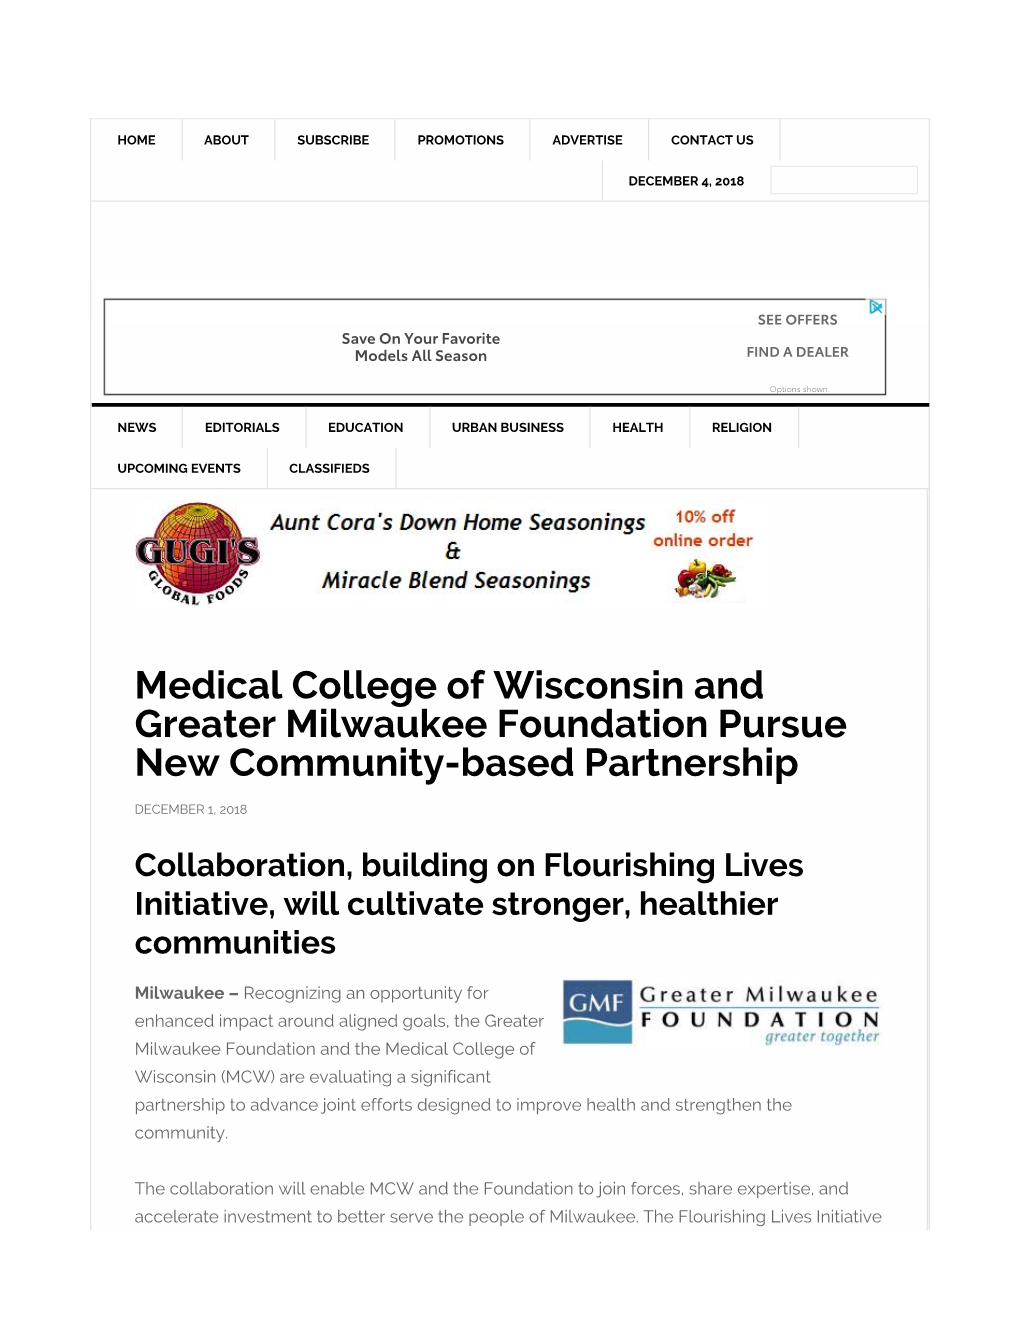 Medical College of Wisconsin and Greater Milwaukee Foundation Pursue New Community-Based Partnership